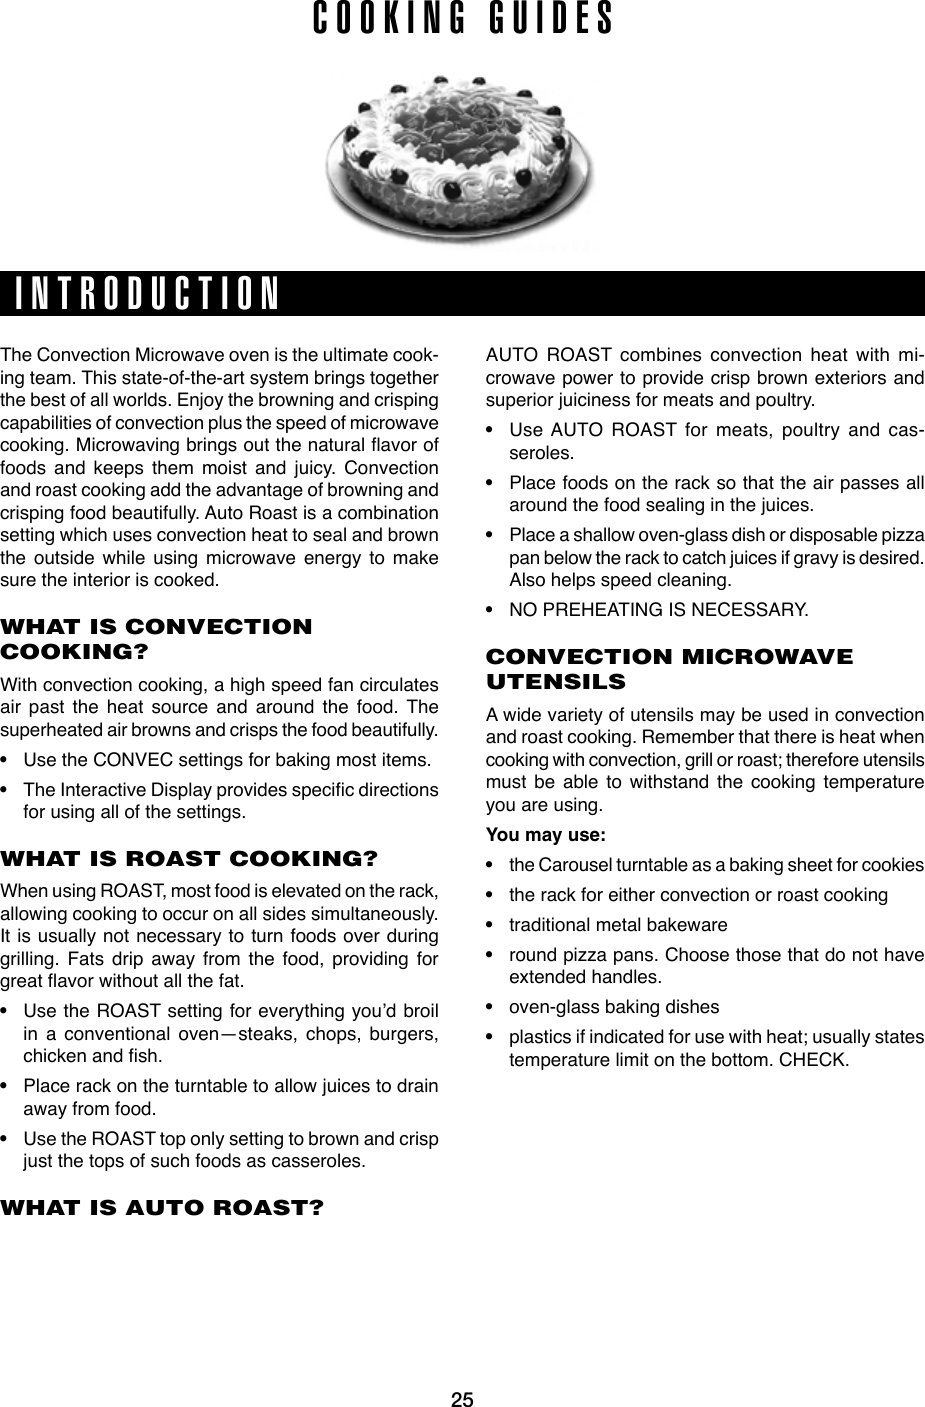 24 25INTRODUCTIONCTIONCOOKINg gUIDESThe Convection Microwave oven is the ultimate cook-ing team. This state-of-the-art system brings together the best of all worlds. Enjoy the browning and crisping capabilities of convection plus the speed of microwave cooking.Microwavingbringsoutthenaturalavoroffoods and keeps them moist and juicy. Convection and roast cooking add the advantage of browning and crisping food beautifully. Auto Roast is a combination setting which uses convection heat to seal and brown the outside while using microwave energy to make sure the interior is cooked.WHAT IS CONVECTION COOKING?With convection cooking, a high speed fan circulates air past the heat source and around the food. The superheated air browns and crisps the food beautifully. • Use the CONVEC settings for baking most items. • TheInteractiveDisplayprovidesspecicdirectionsfor using all of the settings.WHAT IS ROAST COOKING?When using ROAST, most food is elevated on the rack, allowing cooking to occur on all sides simultaneously. It is usually not necessary to turn foods over during grilling. Fats drip away from the food, providing for greatavorwithoutallthefat.• Use the ROAST setting for everything you’d broil in a conventional oven—steaks, chops, burgers, chickenandsh.• Place rack on the turntable to allow juices to drain away from food.• Use the ROAST top only setting to brown and crisp just the tops of such foods as casseroles.WHAT IS AUTO ROAST?AUTO ROAST combines convection heat with mi-crowave power to provide crisp brown exteriors and superior juiciness for meats and poultry.• Use AUTO ROAST for meats, poultry and cas-seroles. • Place foods on the rack so that the air passes all around the food sealing in the juices.• Place a shallow oven-glass dish or disposable pizza pan below the rack to catch juices if gravy is desired. Also helps speed cleaning.• NO PREHEATING IS NECESSARY.CONVECTION MICROWAVE UTENSILSA wide variety of utensils may be used in convection and roast cooking. Remember that there is heat when cooking with convection, grill or roast; therefore utensils must be able to withstand the cooking temperature you are using. You may use:• the Carousel turntable as a baking sheet for cookies• the rack for either convection or roast cooking• traditional metal bakeware• round pizza pans. Choose those that do not have extended handles.• oven-glass baking dishes• plastics if indicated for use with heat; usually states temperature limit on the bottom. CHECK.